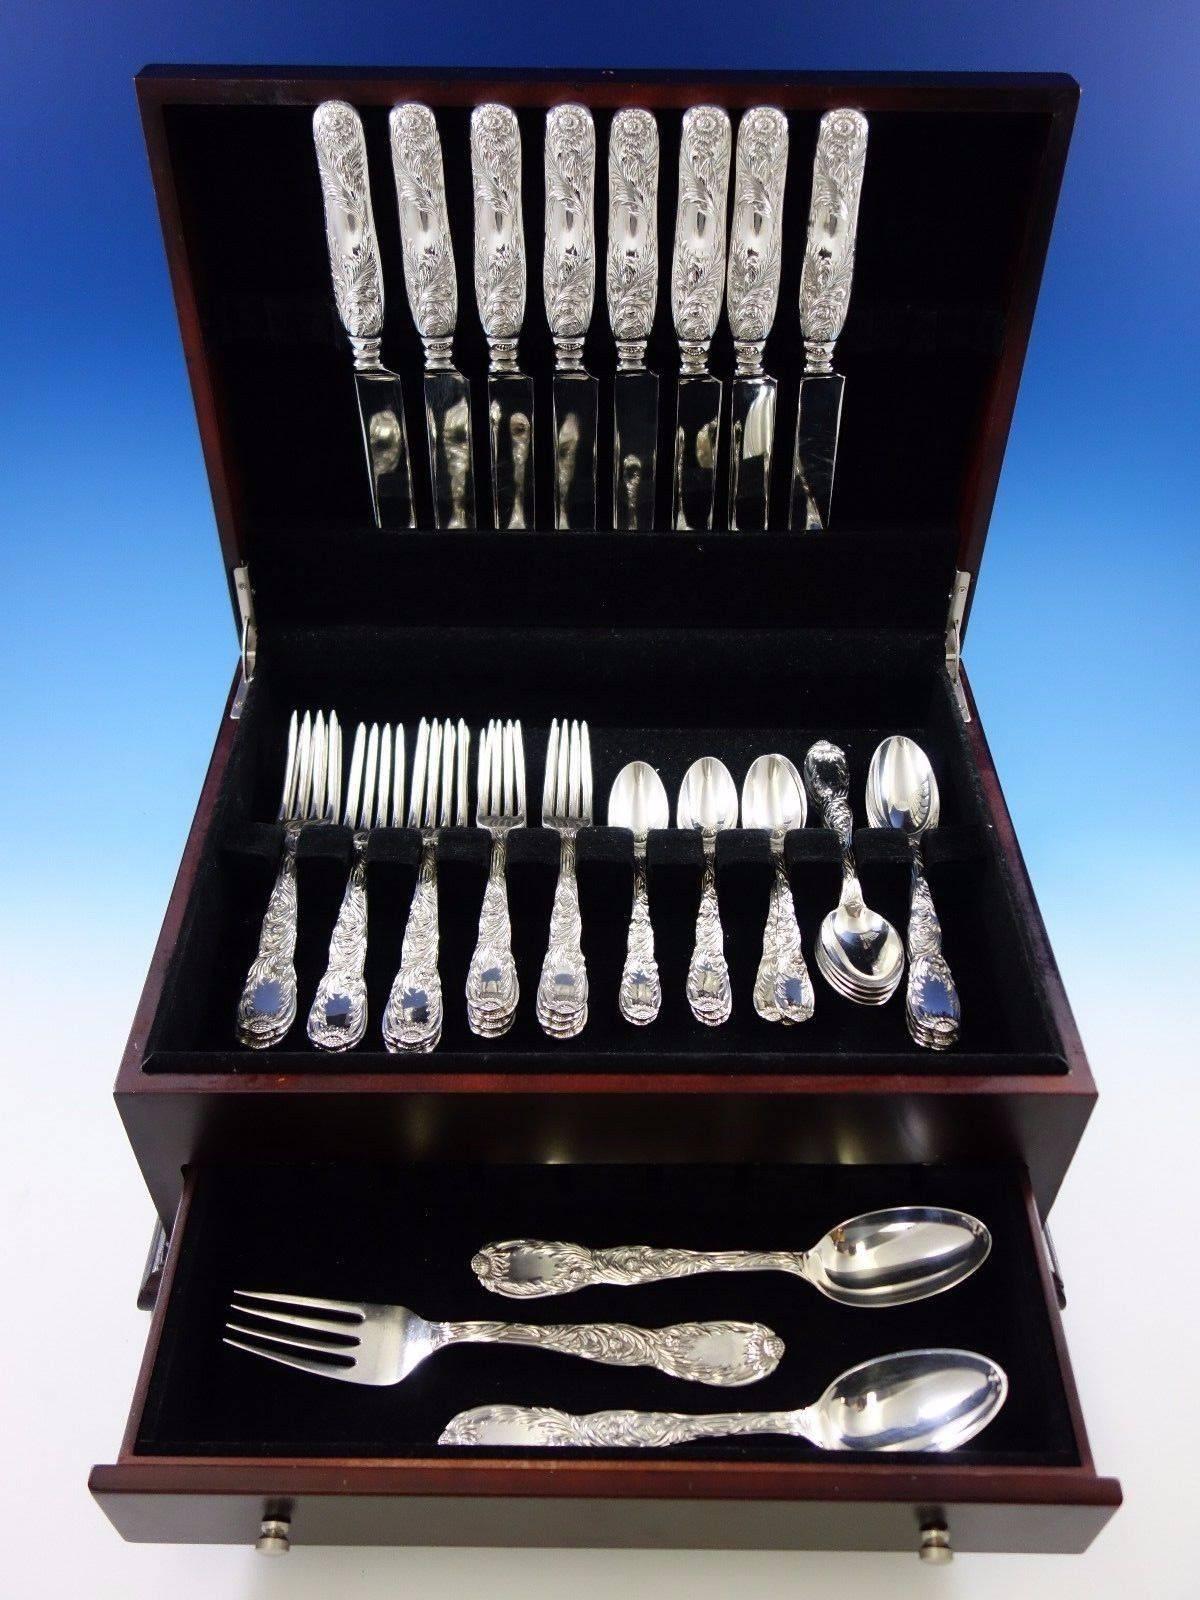 Chrysanthemum by Tiffany and Co. sterling silver flatware set, 43 pieces. This set includes:

Eight dinner knives, 10 1/4"
Eight dinner forks, 7 1/2"
Eight salad / luncheon forks, 6 7/8"
Eight teaspoons, 5 7/8"
Eight place soup